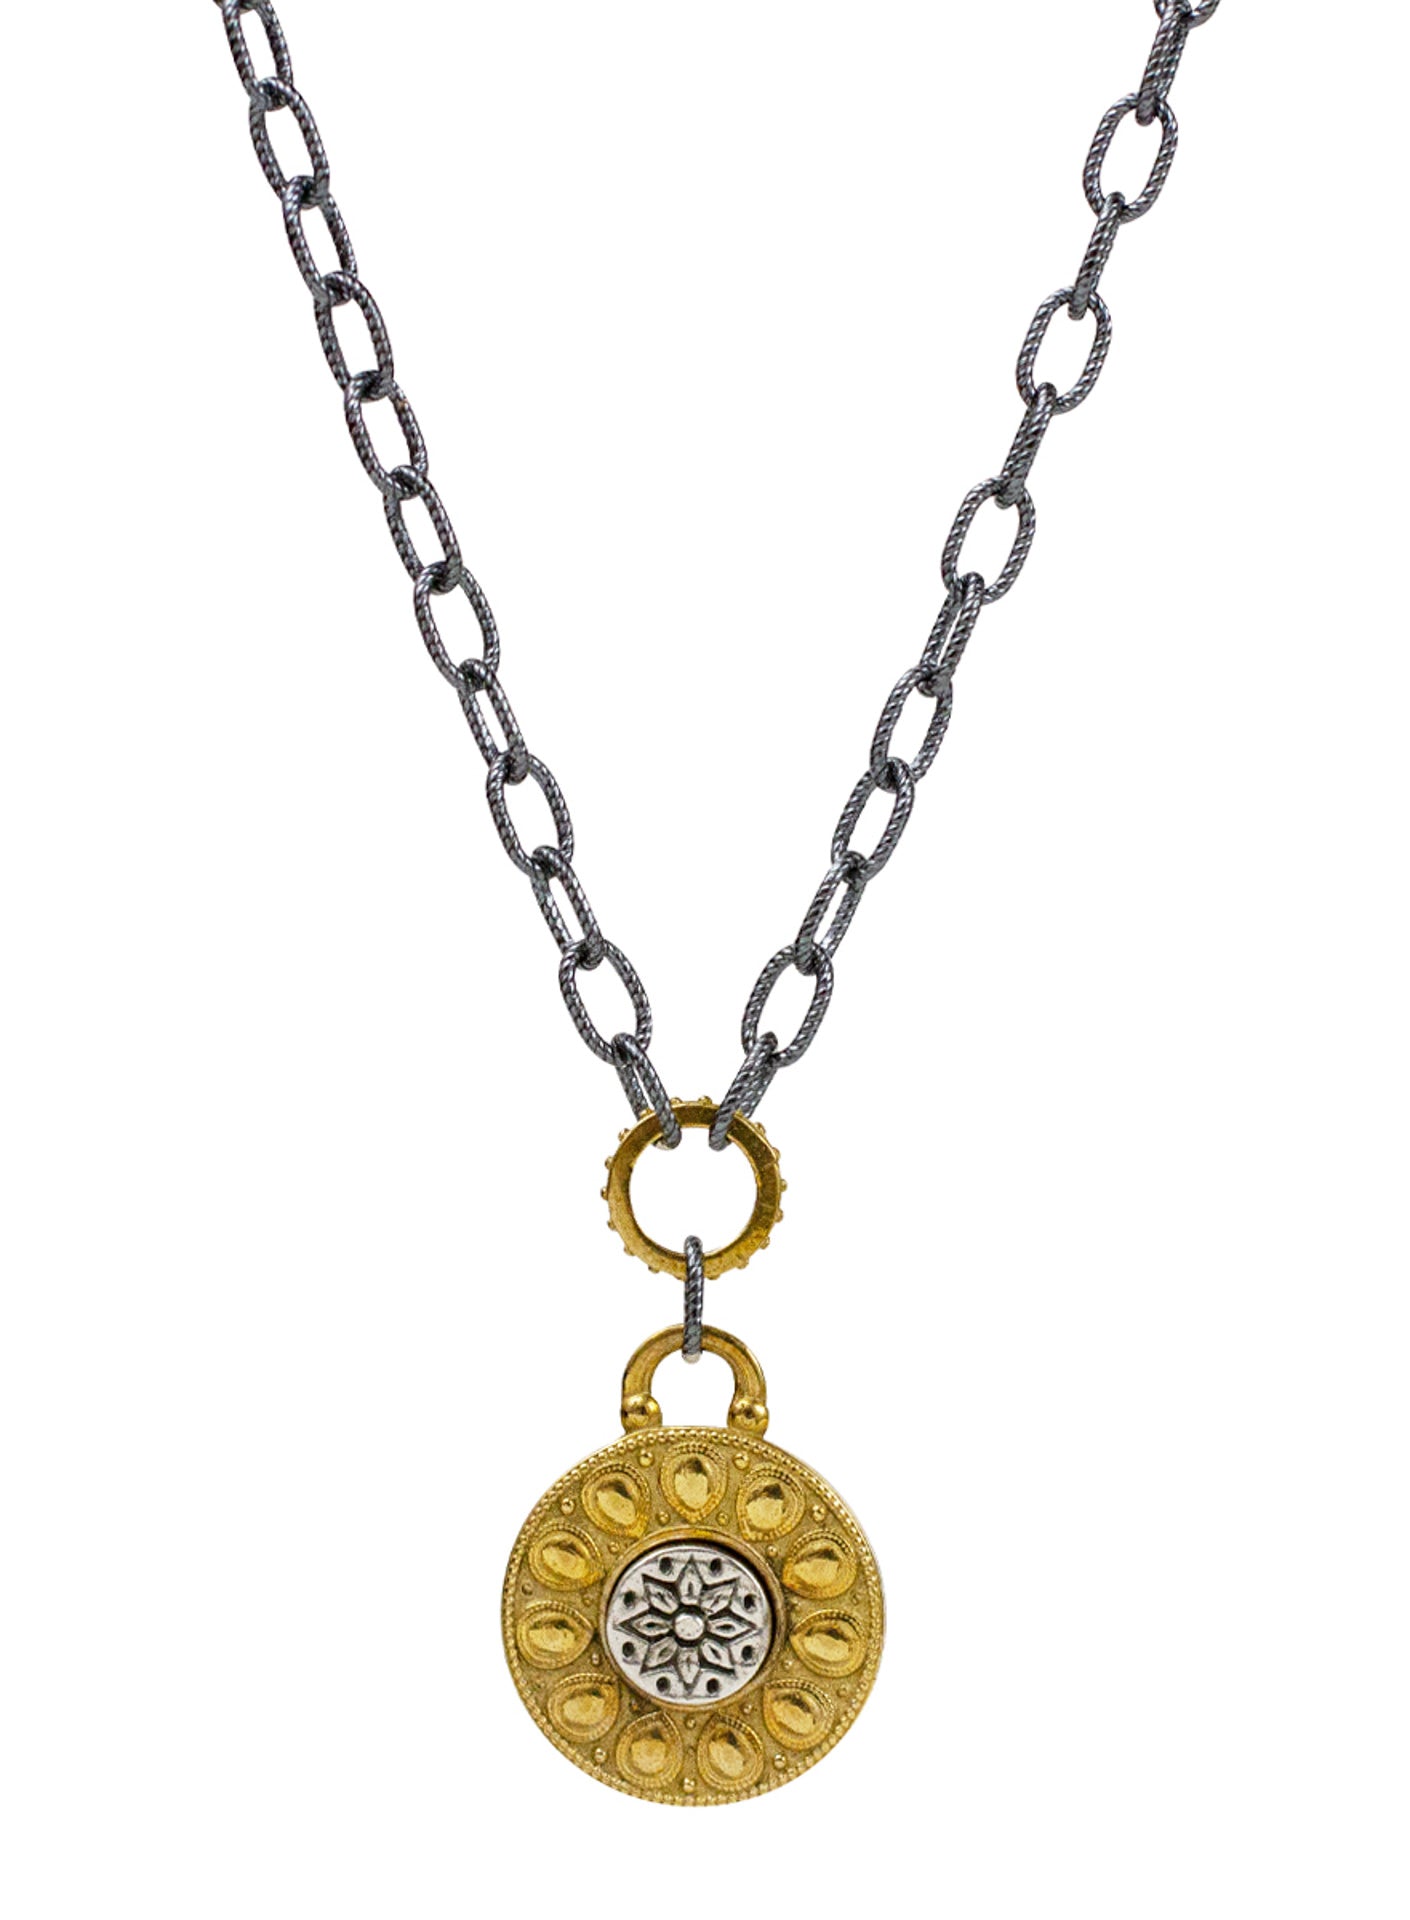 Channel Necklace - Satya "live your truth"